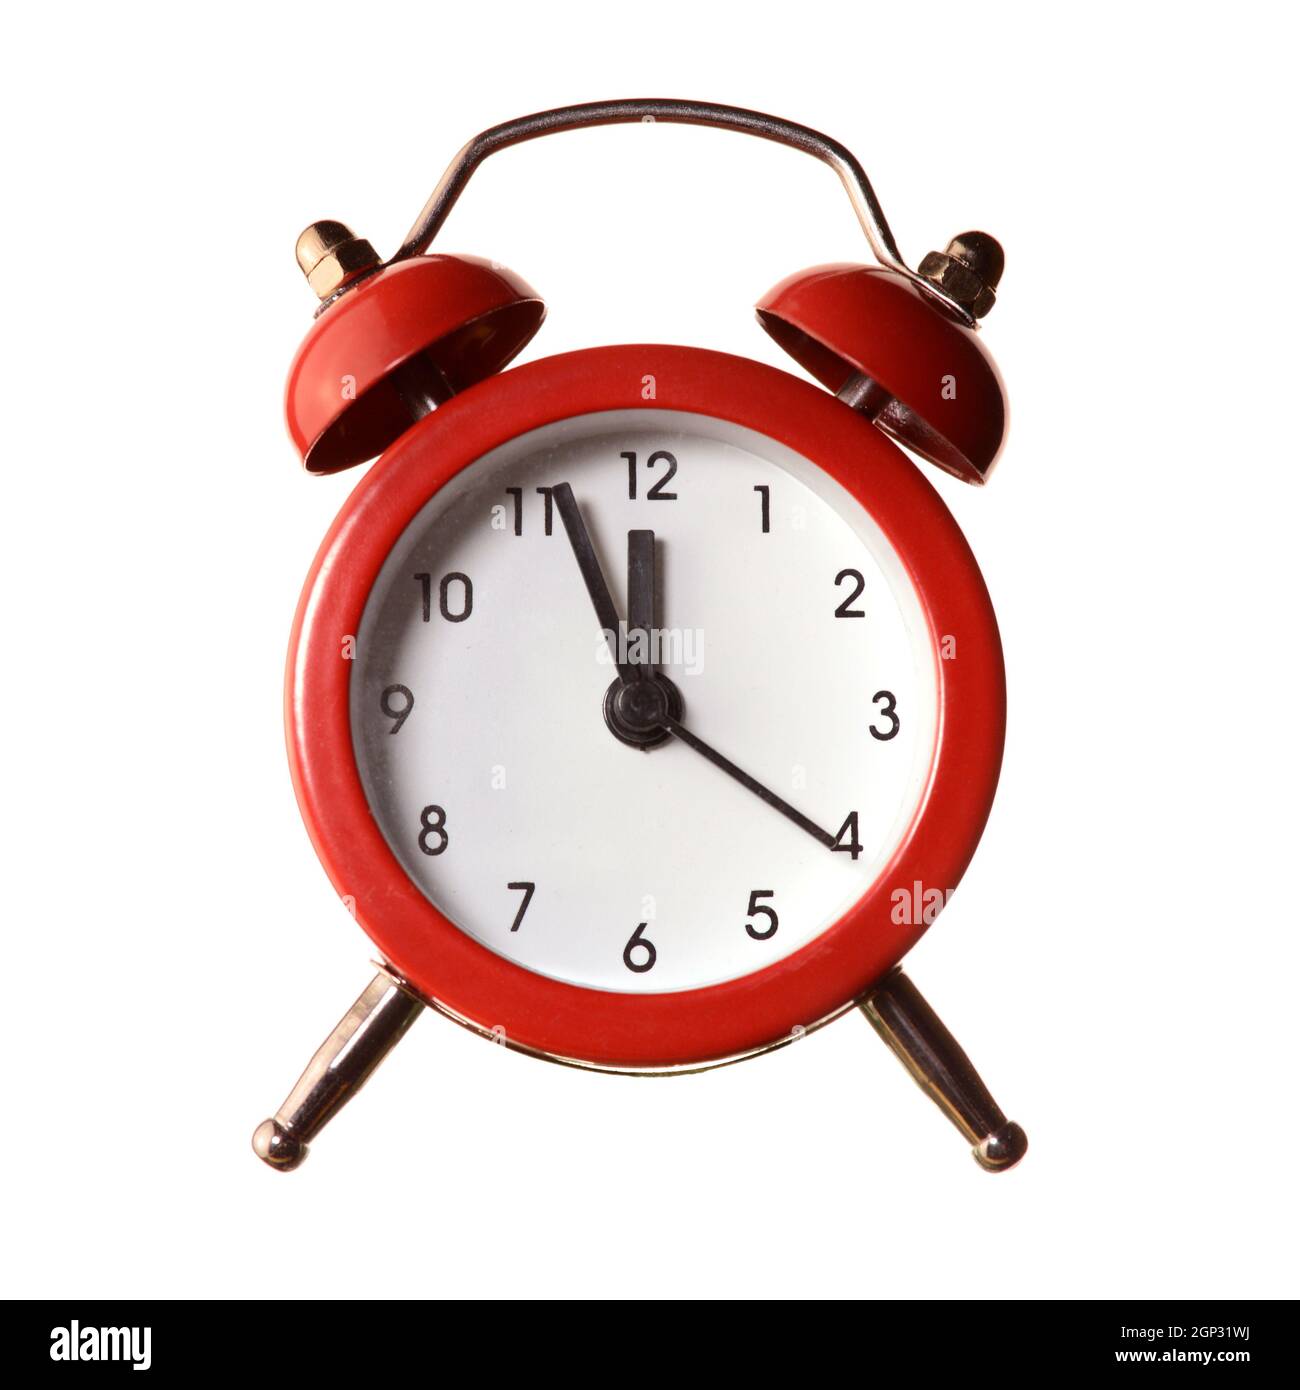 An isolated over white background image of a red alarm clock displaying a time of five minutes to twelve oclock. Stock Photo